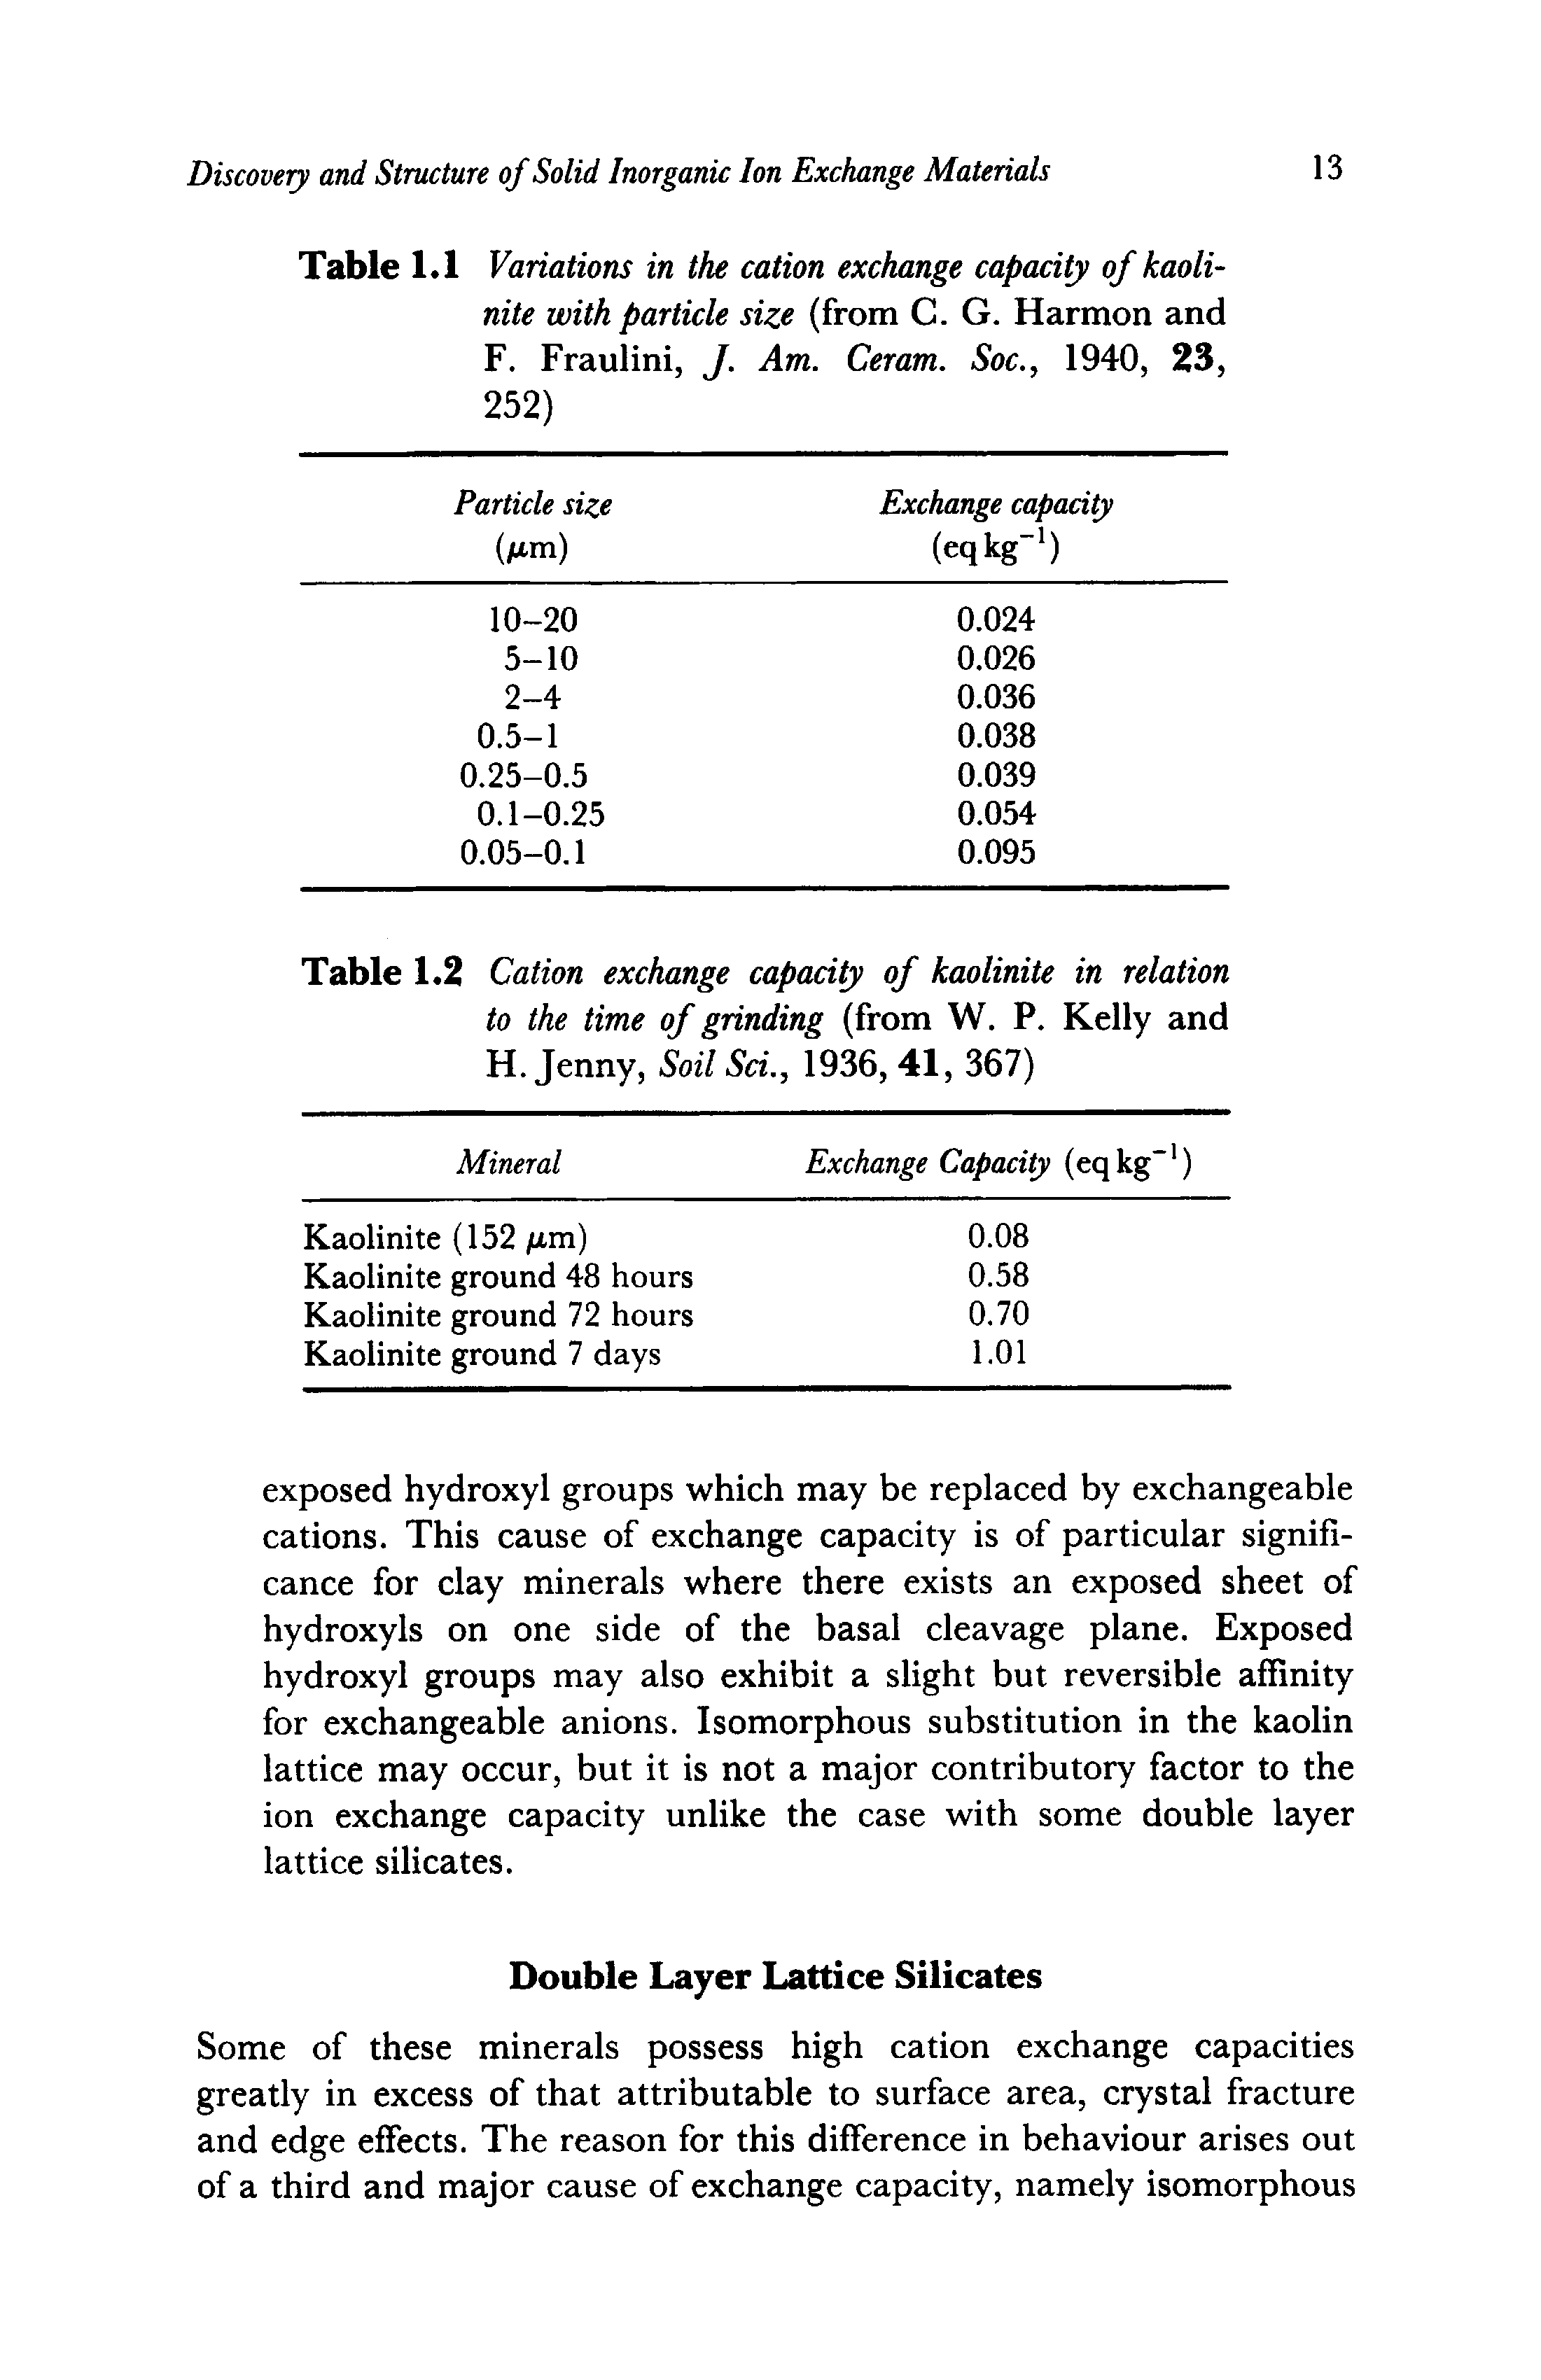 Table 1.1 Variations in the cation exchange capacity of kaoli-nite with particle size (from C. G. Harmon and F. Fraulini, J. Am. Ceram. Soc., 1940, 23, 252)...